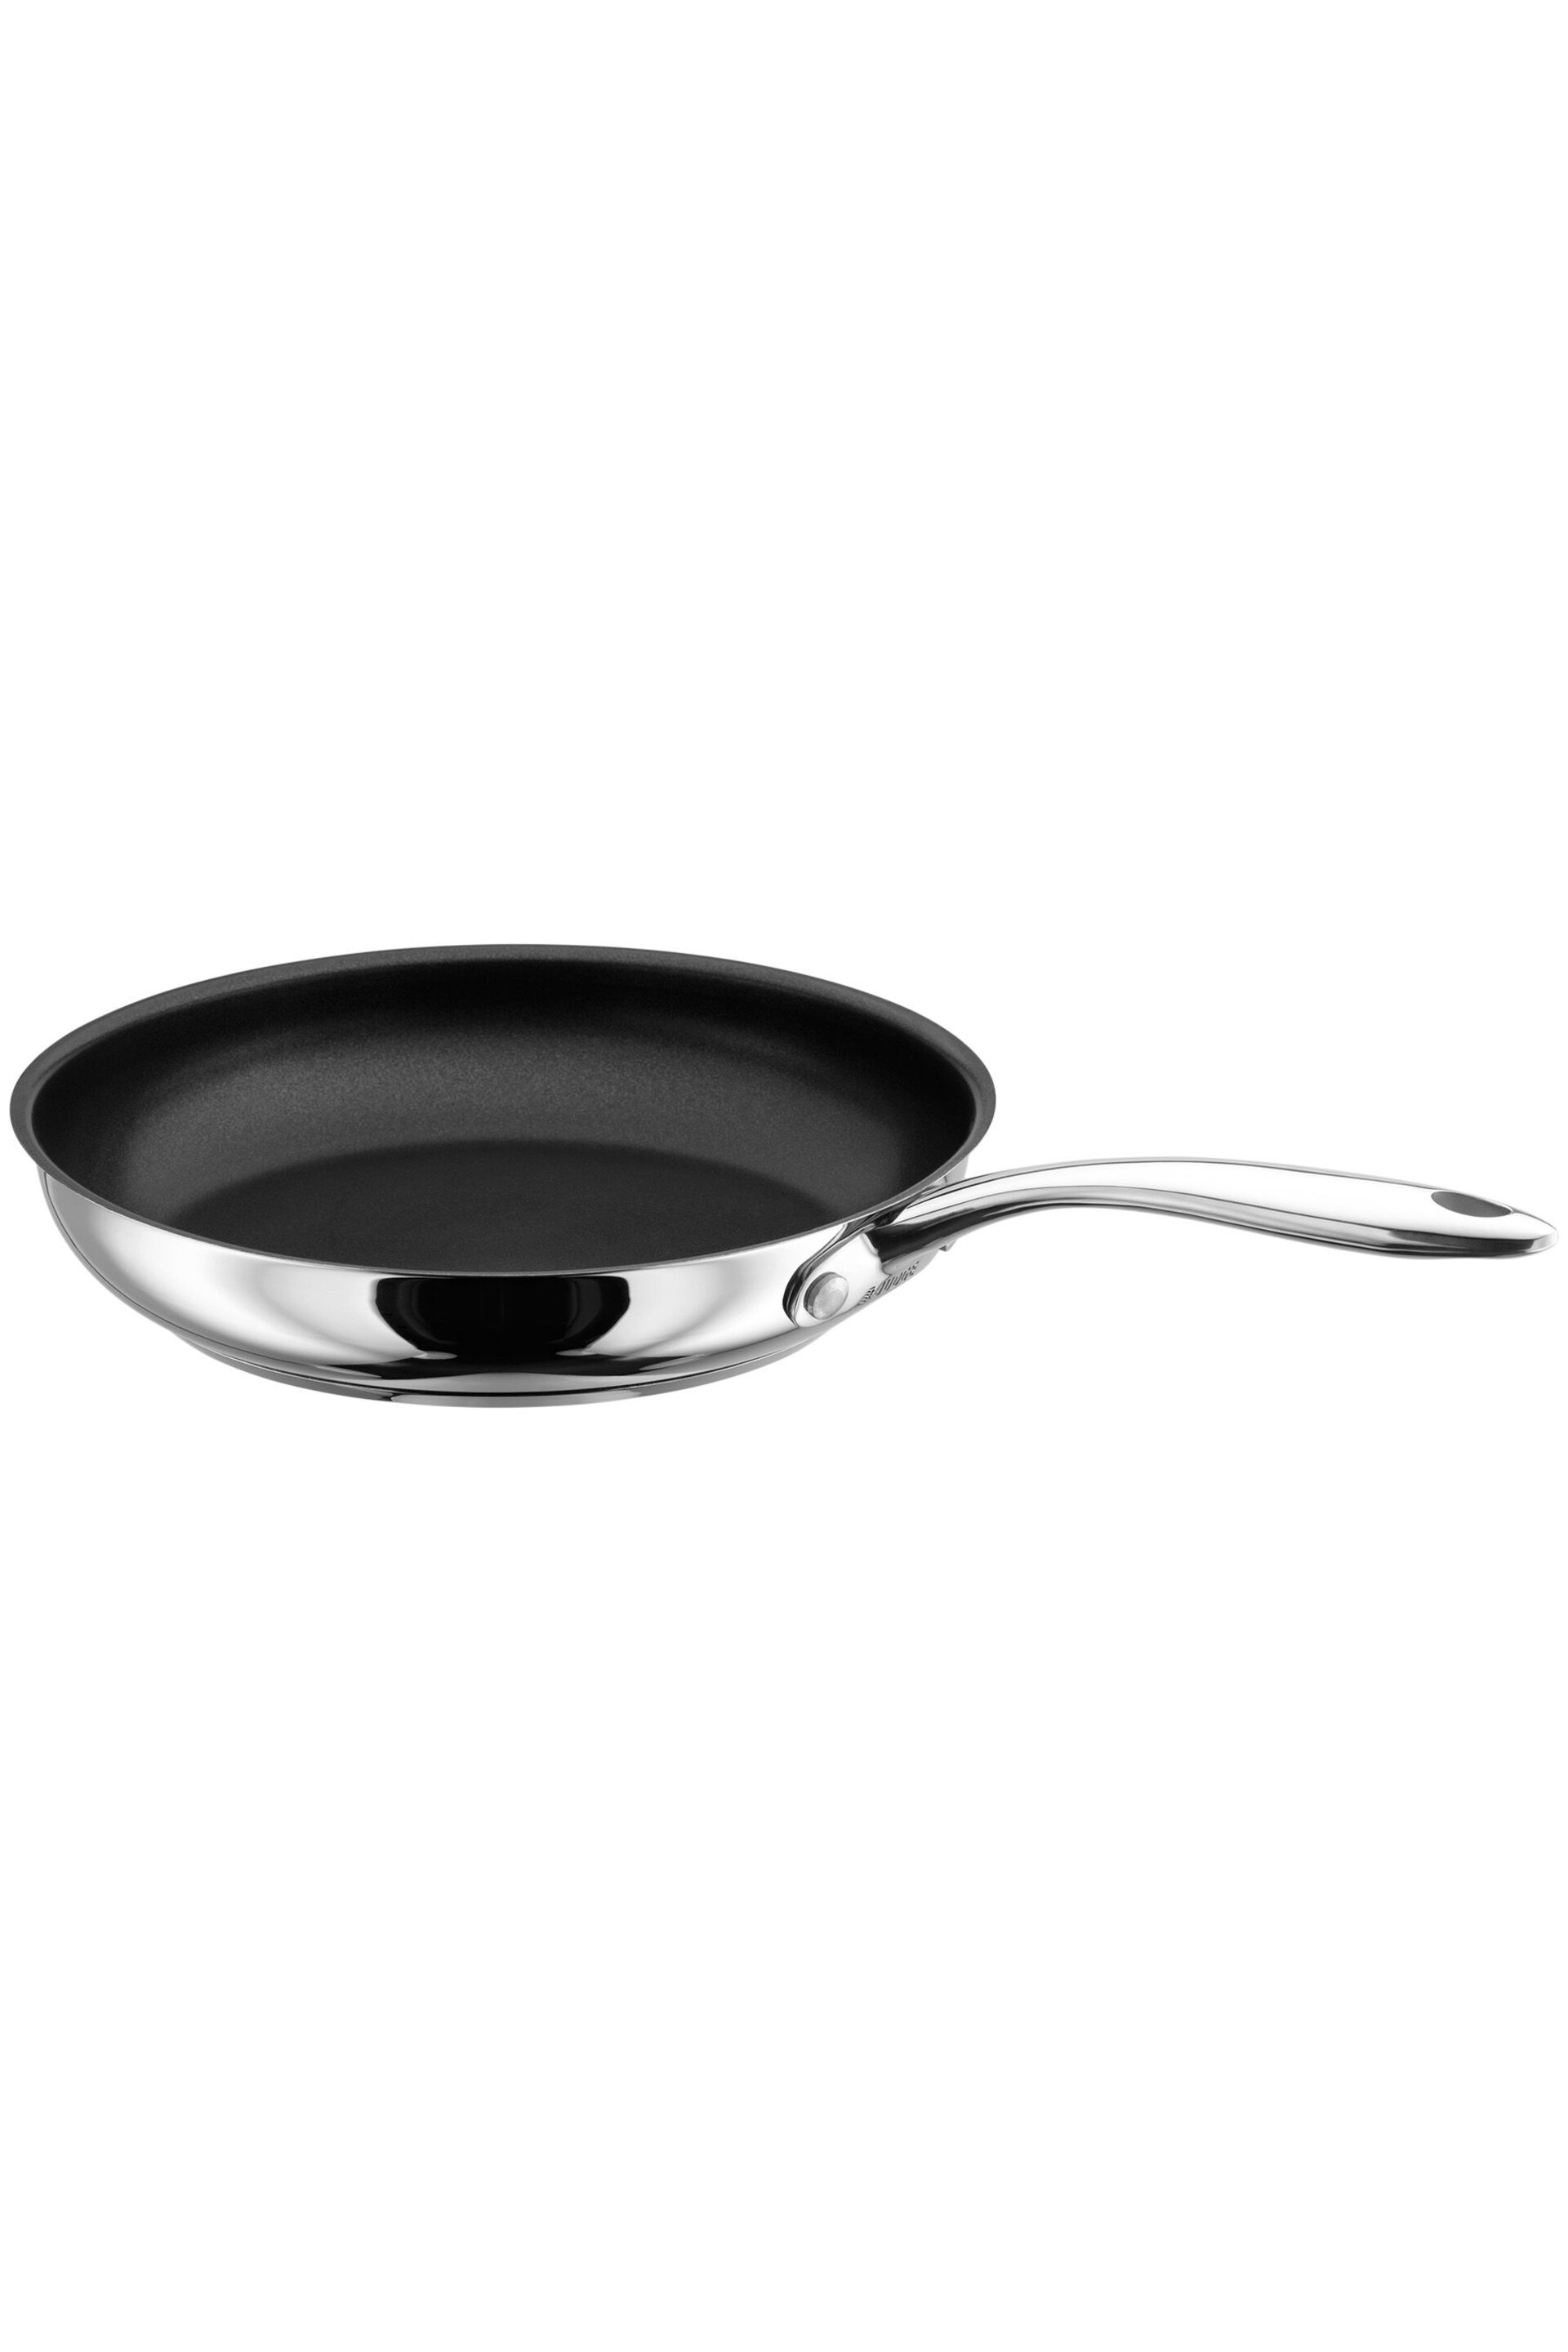 Judge Silver Classic Non Stick Frying Pan 24cm - Image 2 of 4